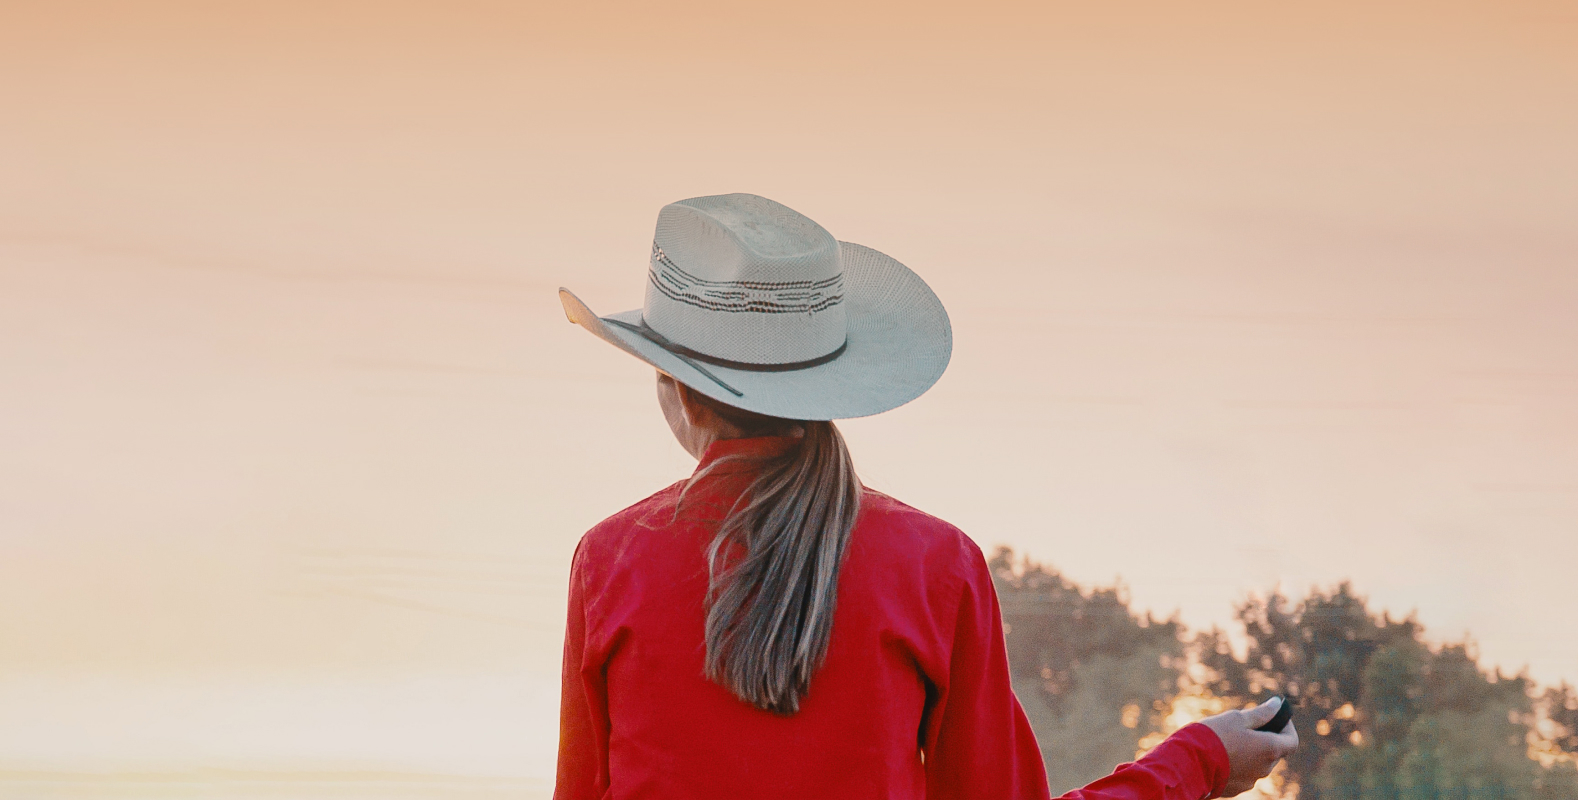 Get the Look: Coastal Cowgirl Style